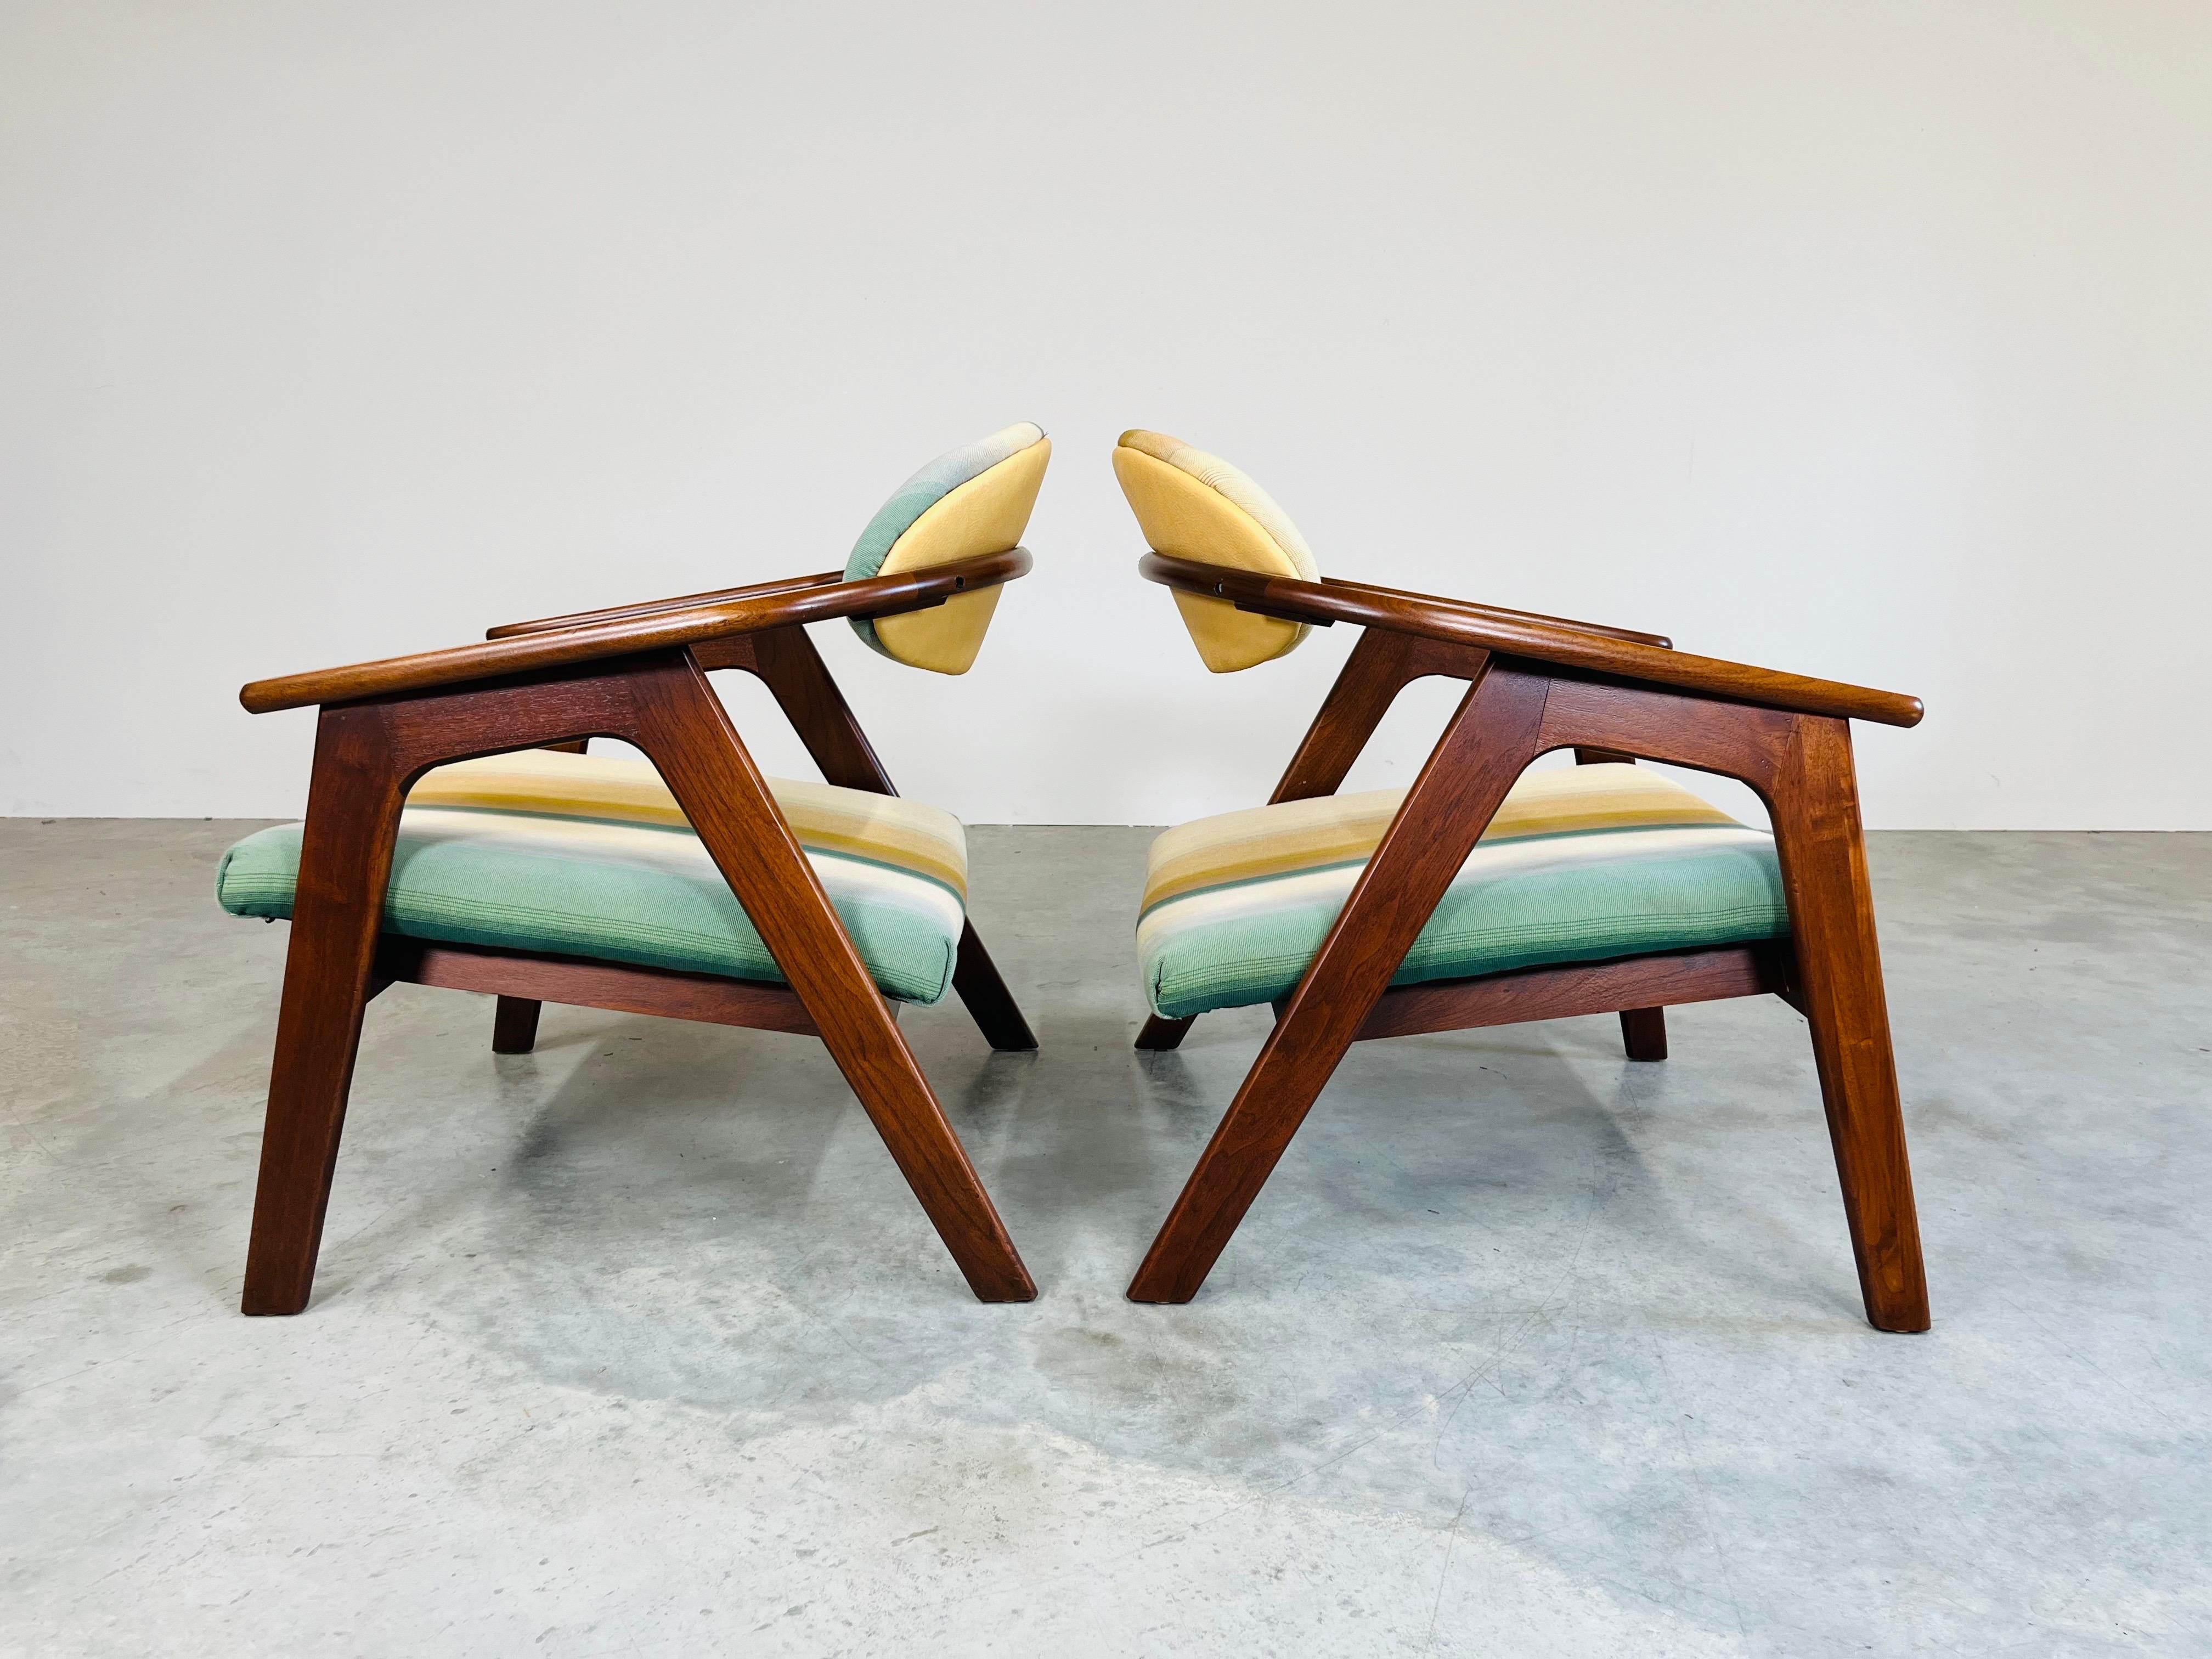 Vegetable Dyed Vintage Sculptural Walnut Pair Of Adrian Pearsall ‘Captains’ Chairs  For Sale